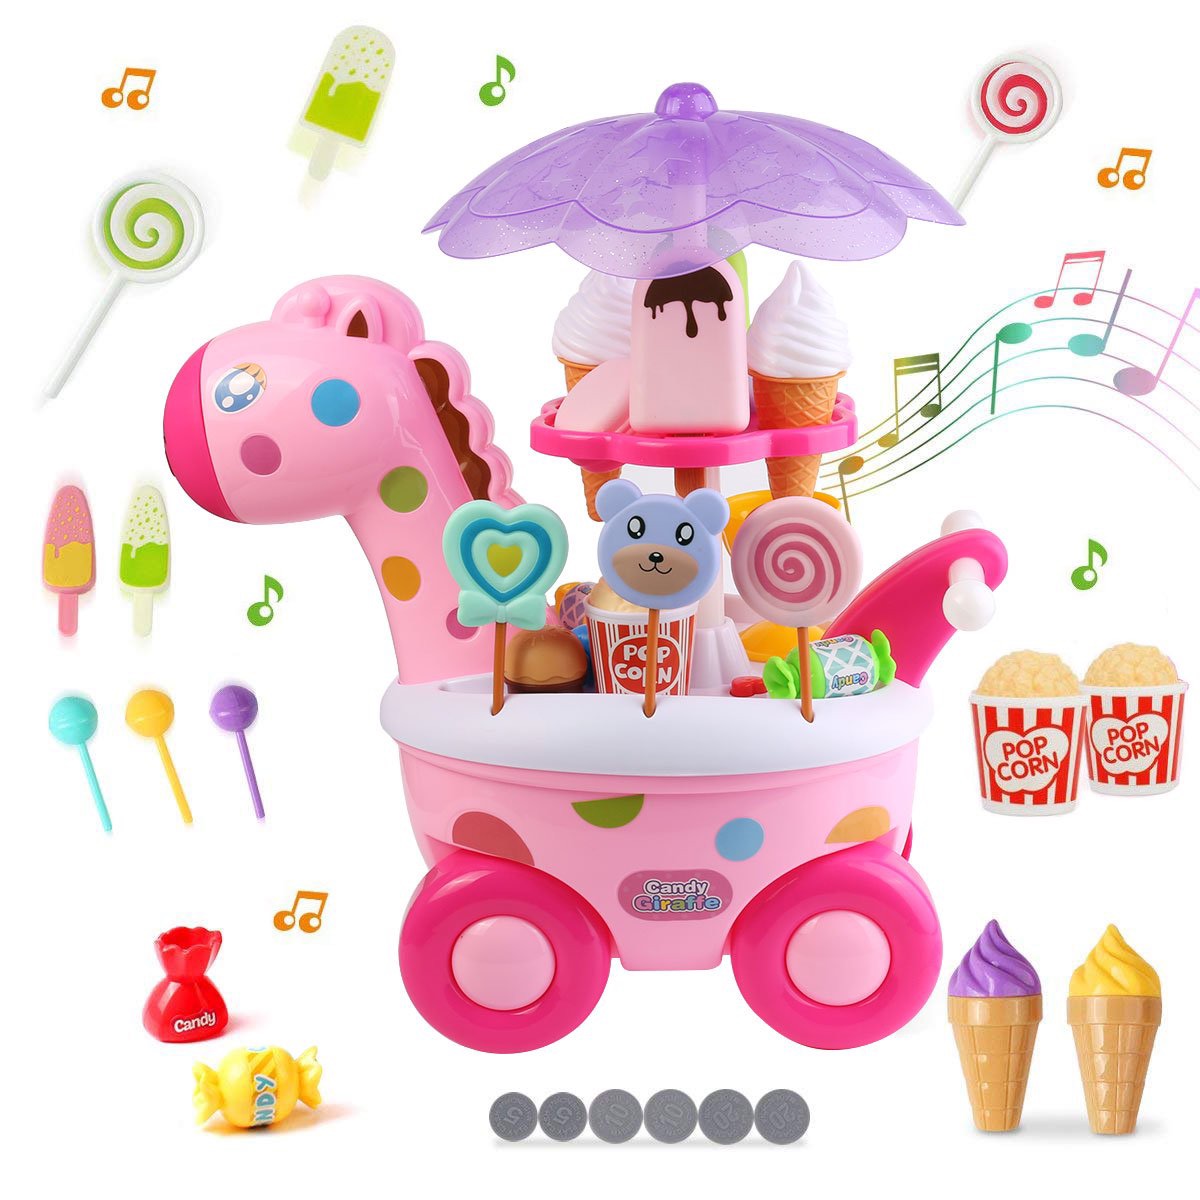 Mini Rotary Ice Cream Candy Cart with Light and Music, Pretend Play Food Selling Cart Toy Sets for Toddlers Boys Girls - Walmart.com - Walmart.com冰淇淋车